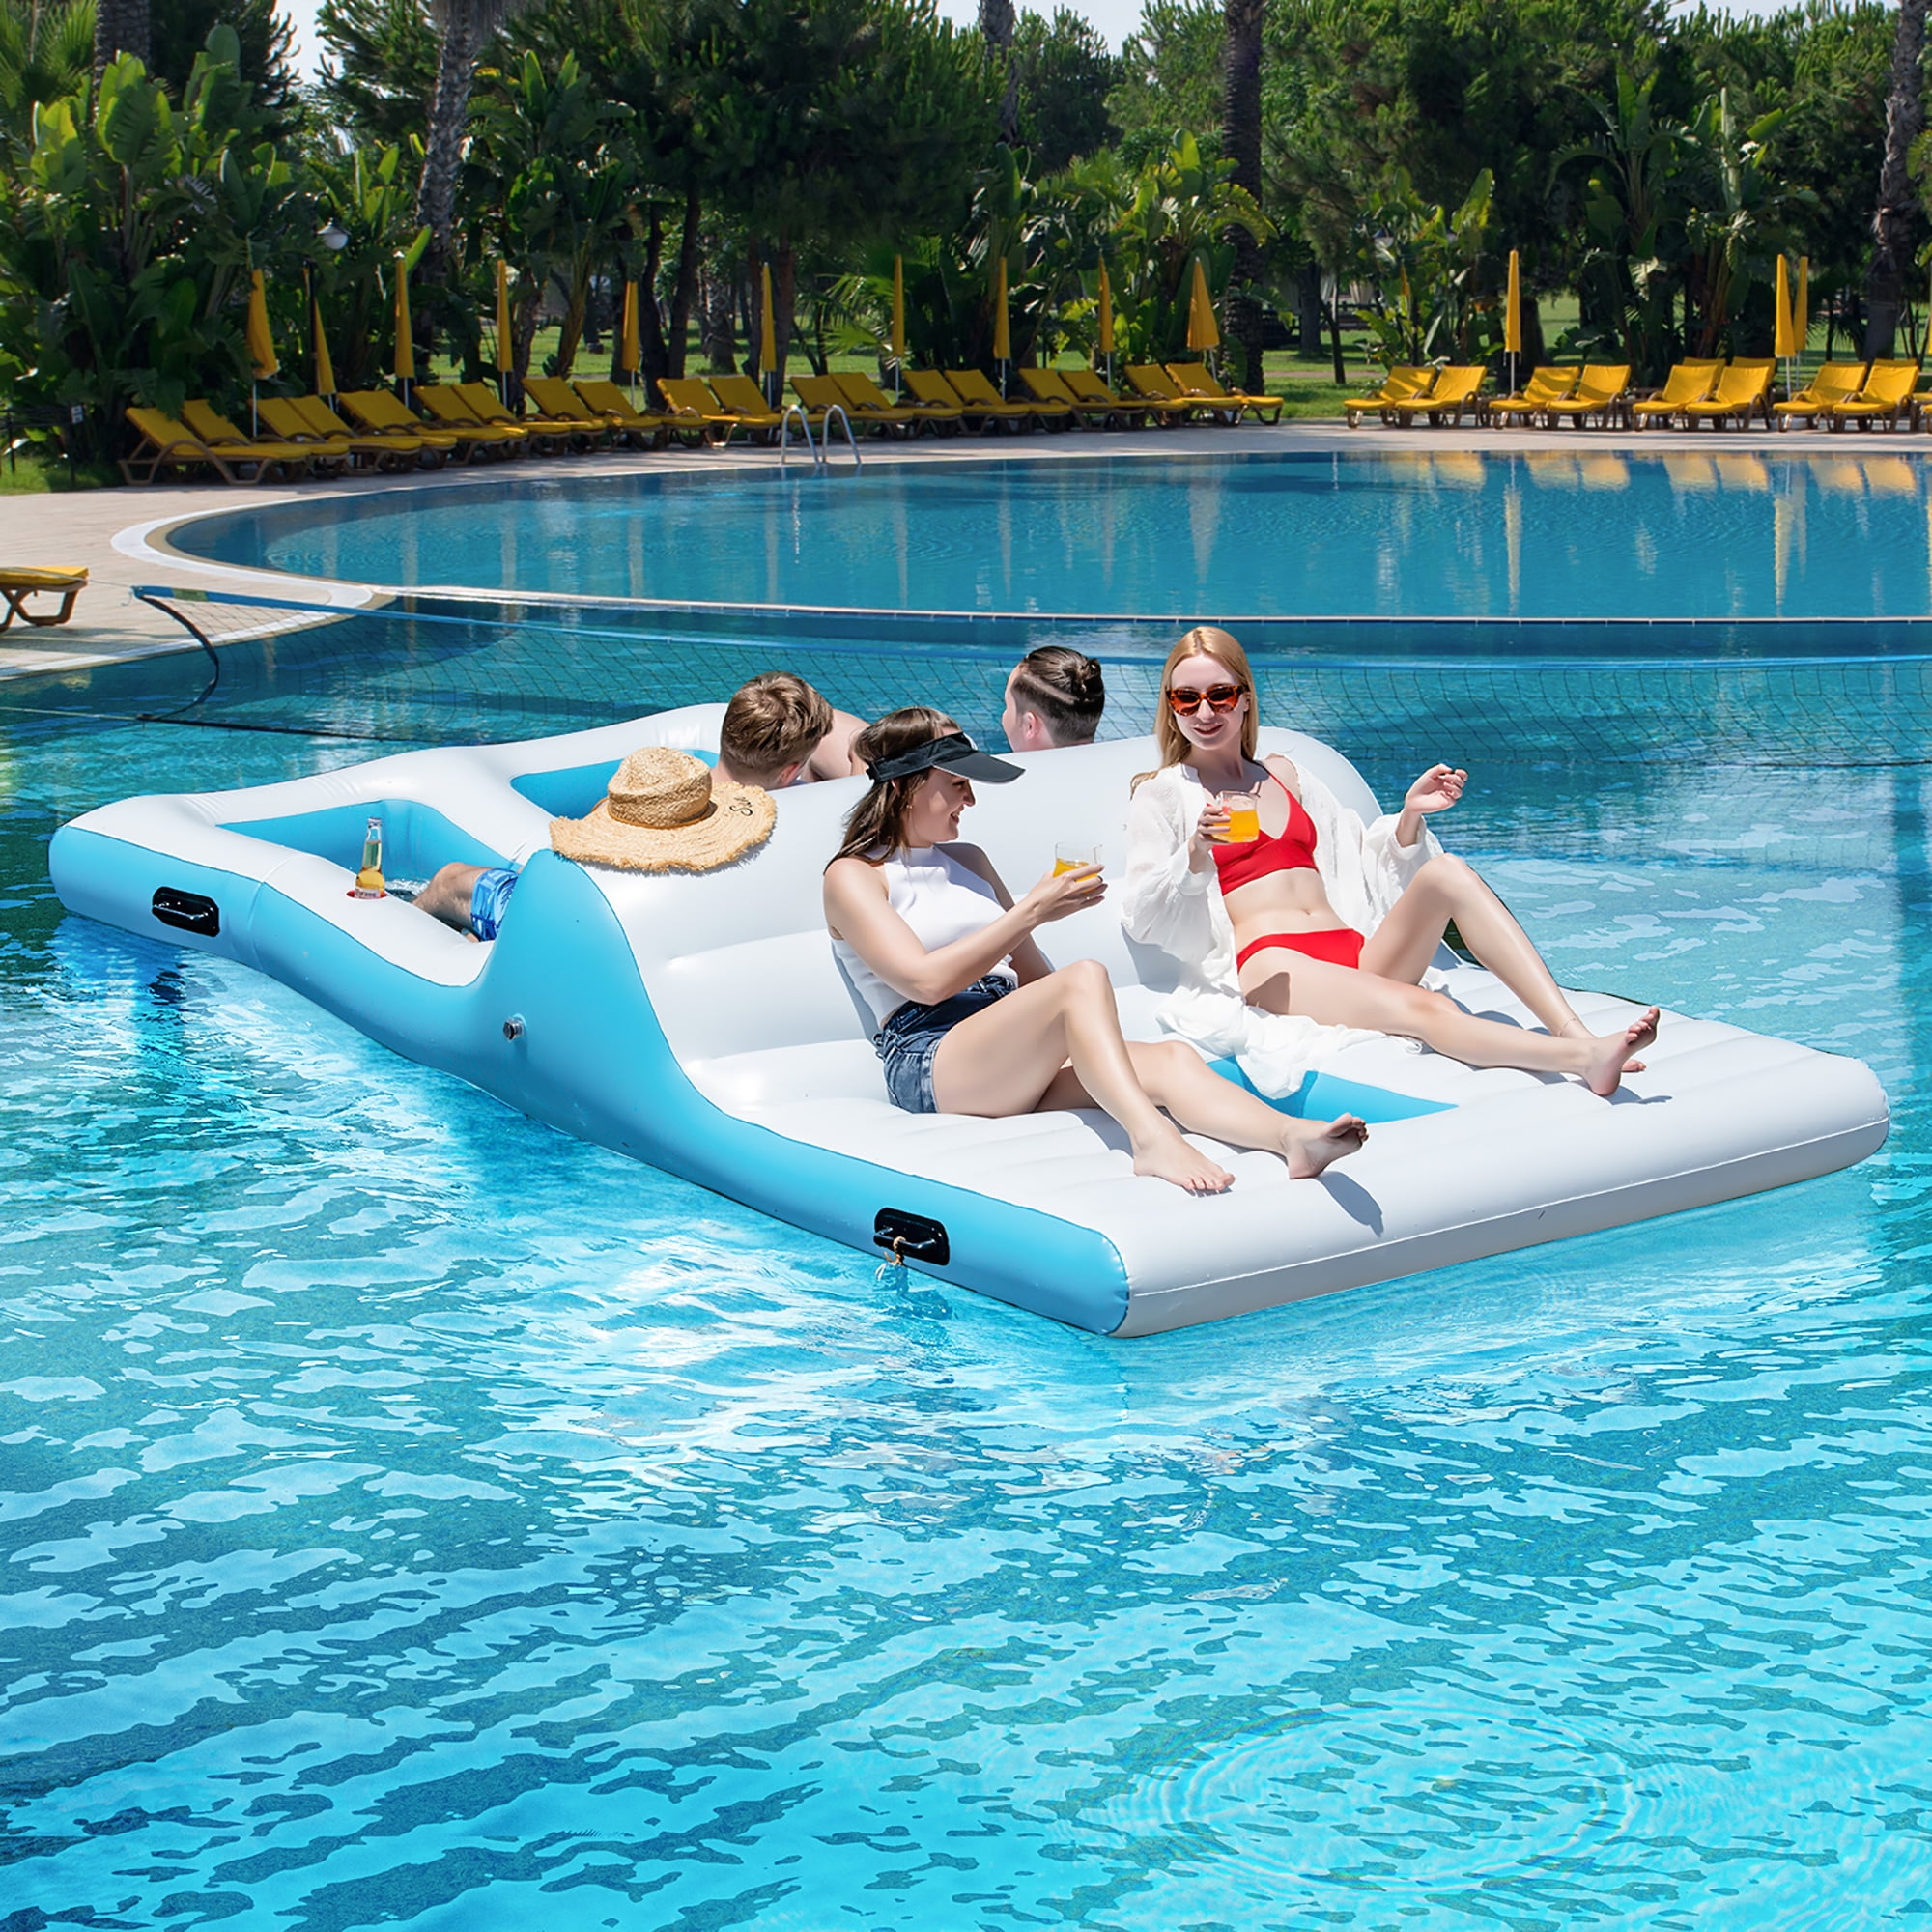 Intex Relaxation Island Lounge 6-Person Raft Floating Inflatable Pool Party Boat 